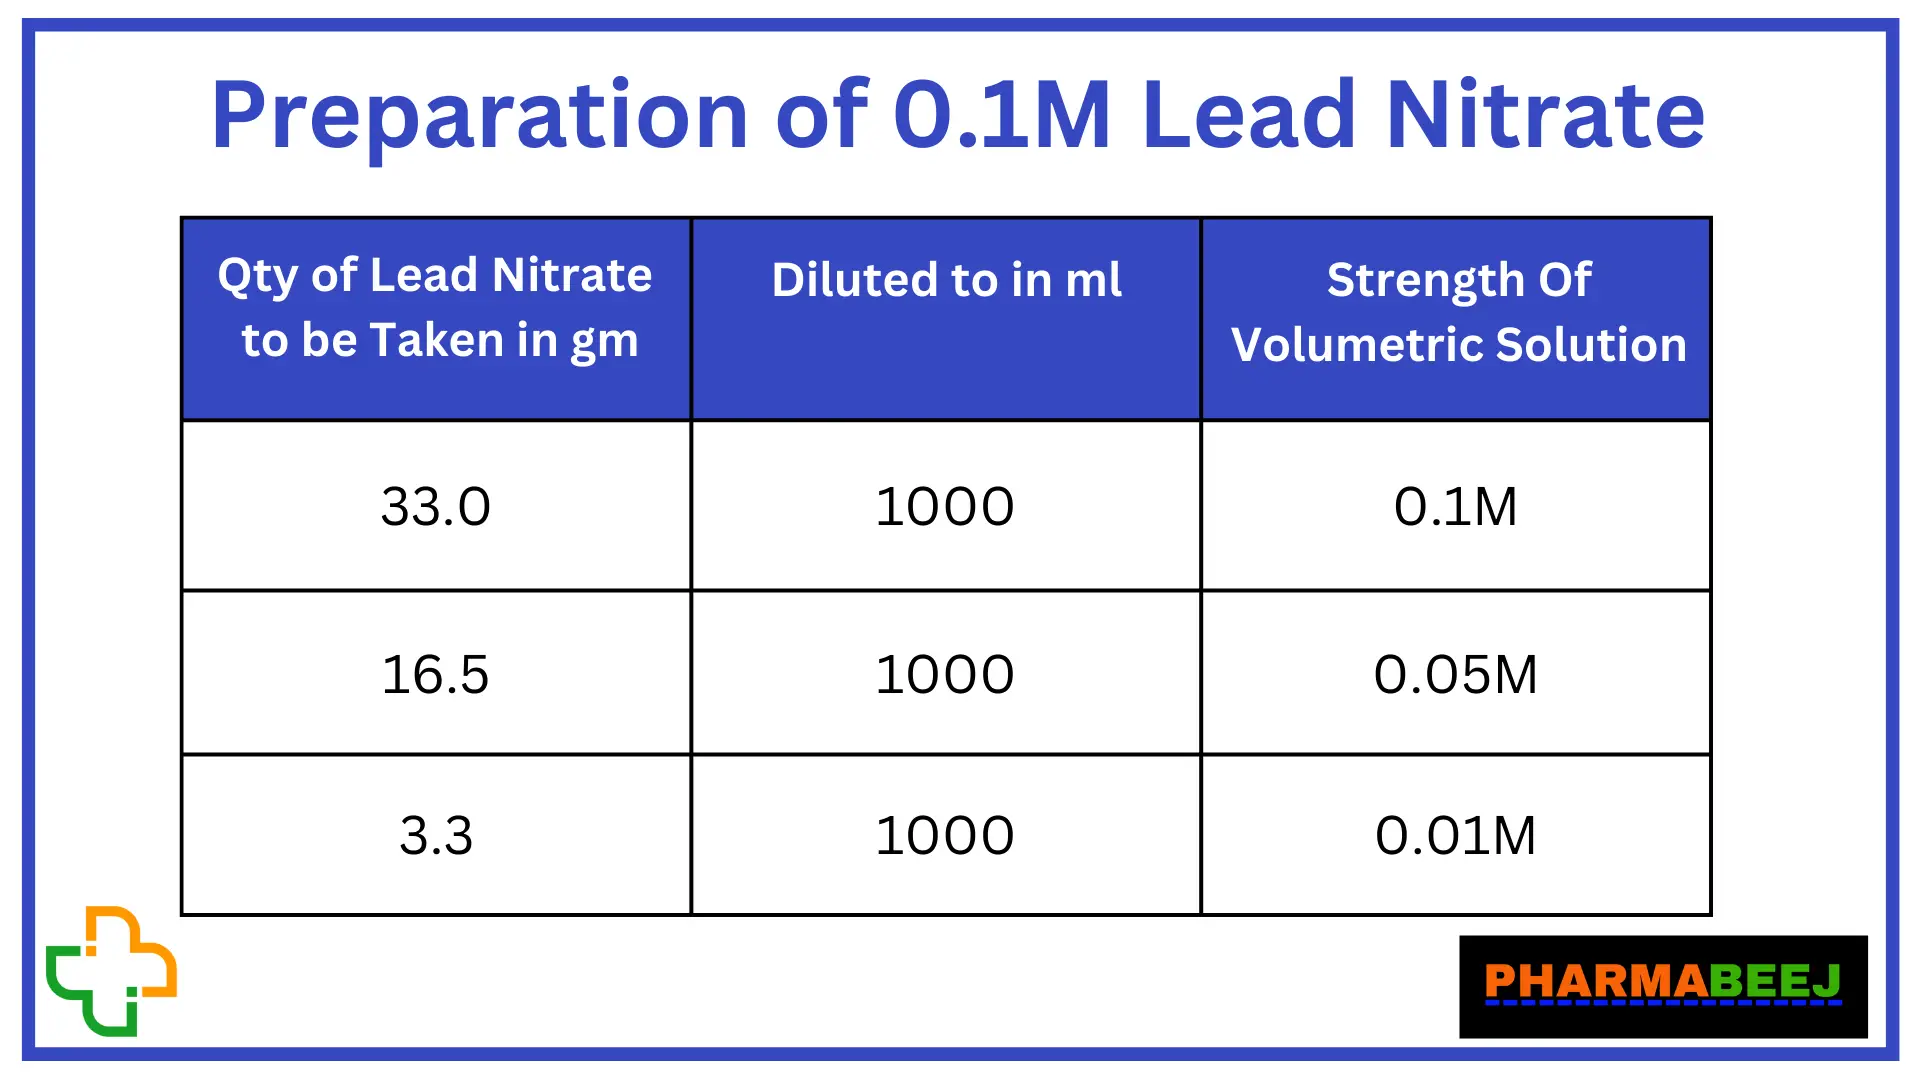 Preparation of 0.1M Lead Nitrate